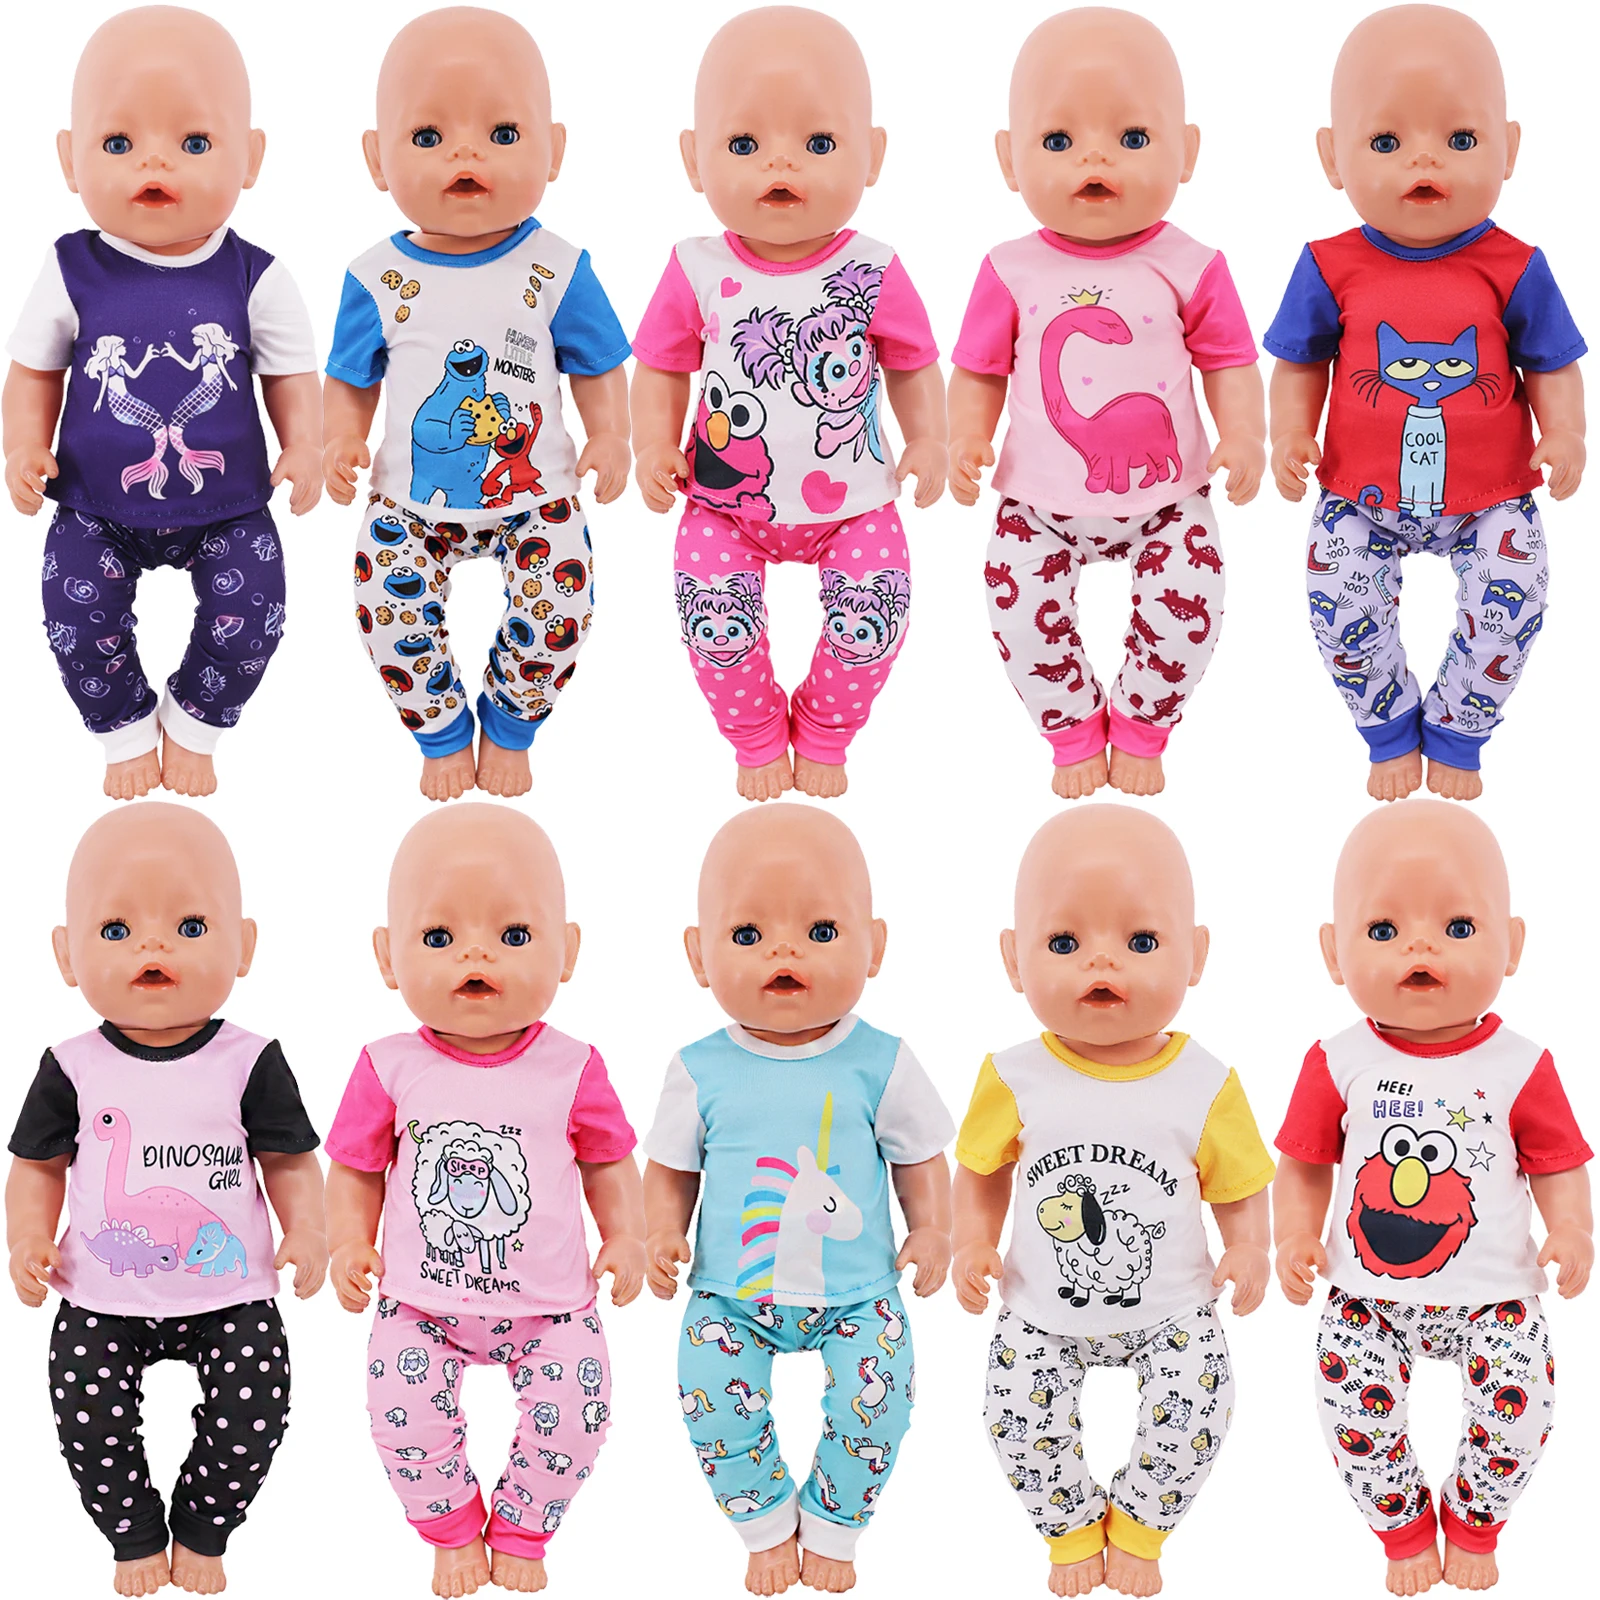 Cute Cartoon Home SUIT  For 18 Inch American &amp; 43 Cm Baby New Born Dolls - $11.08+